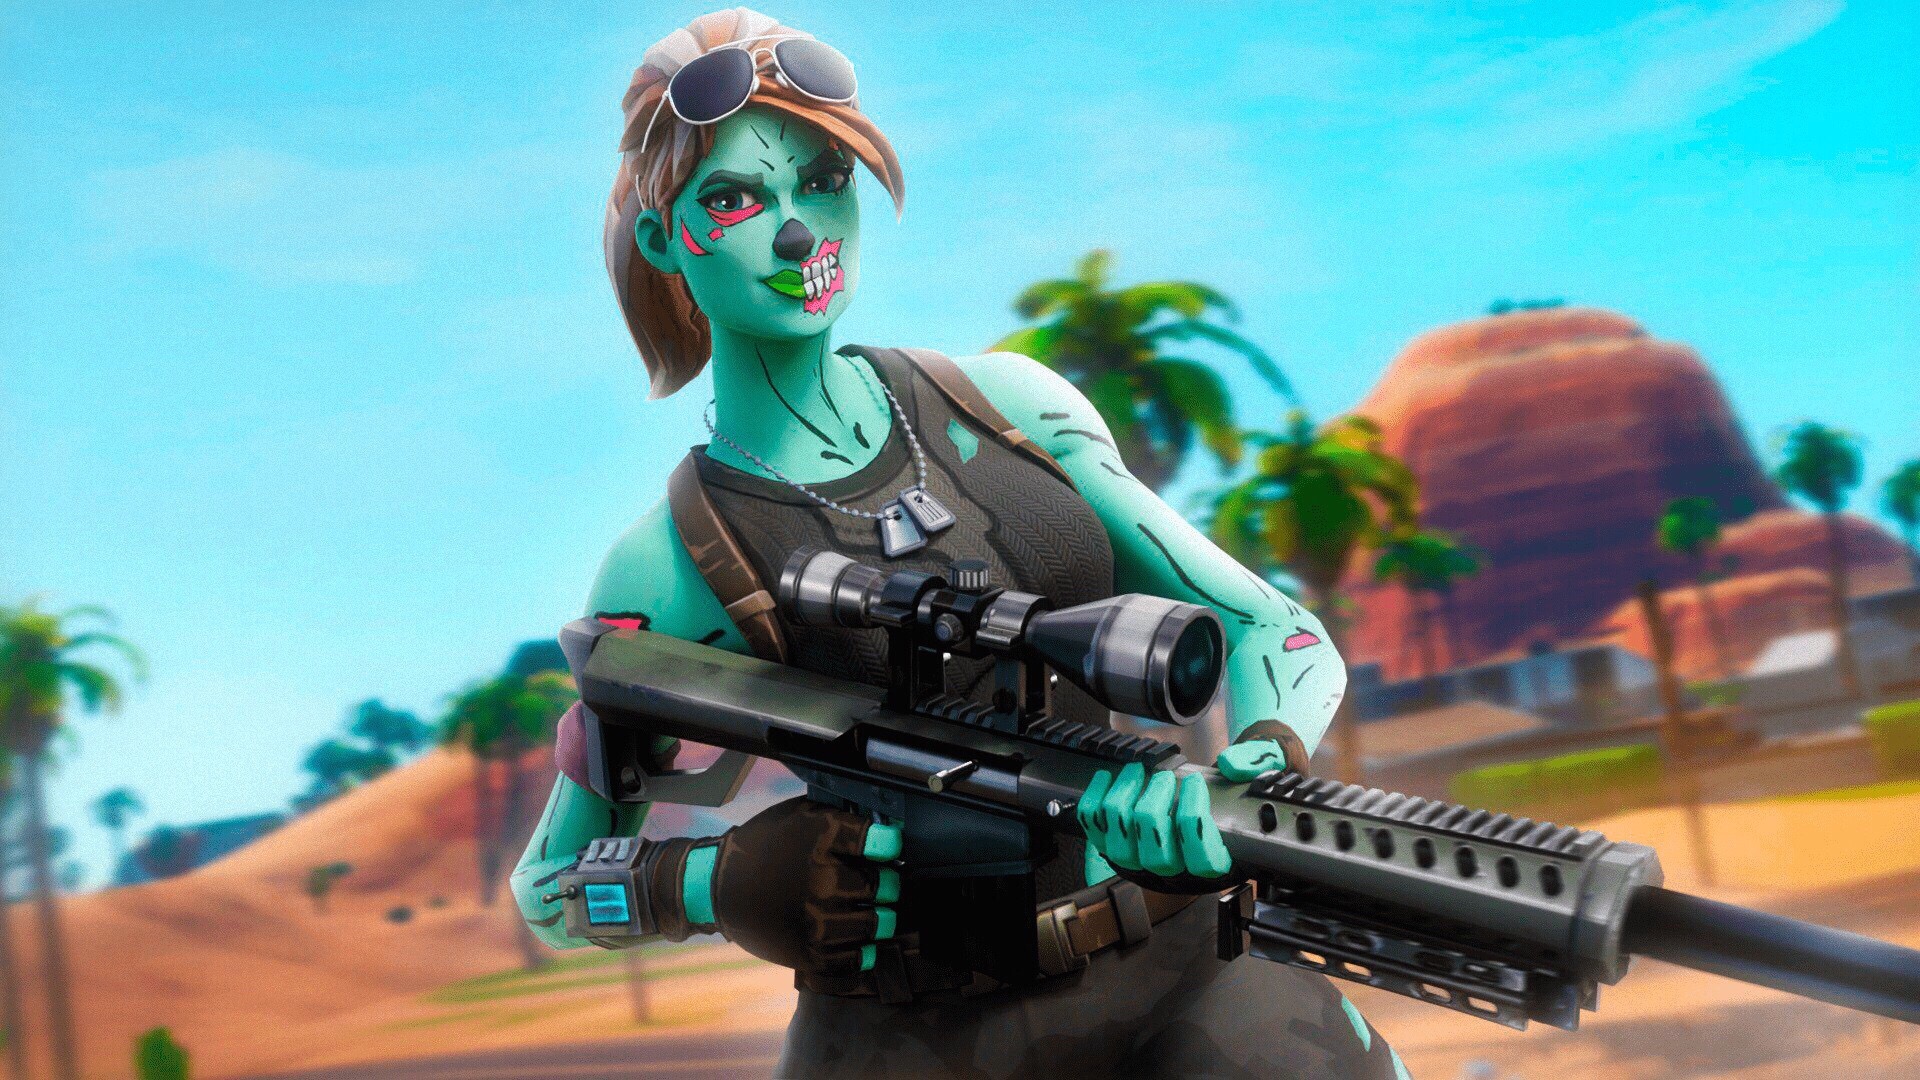 freetoedit thumbnail nogops fortnite image by @chilliefishy.